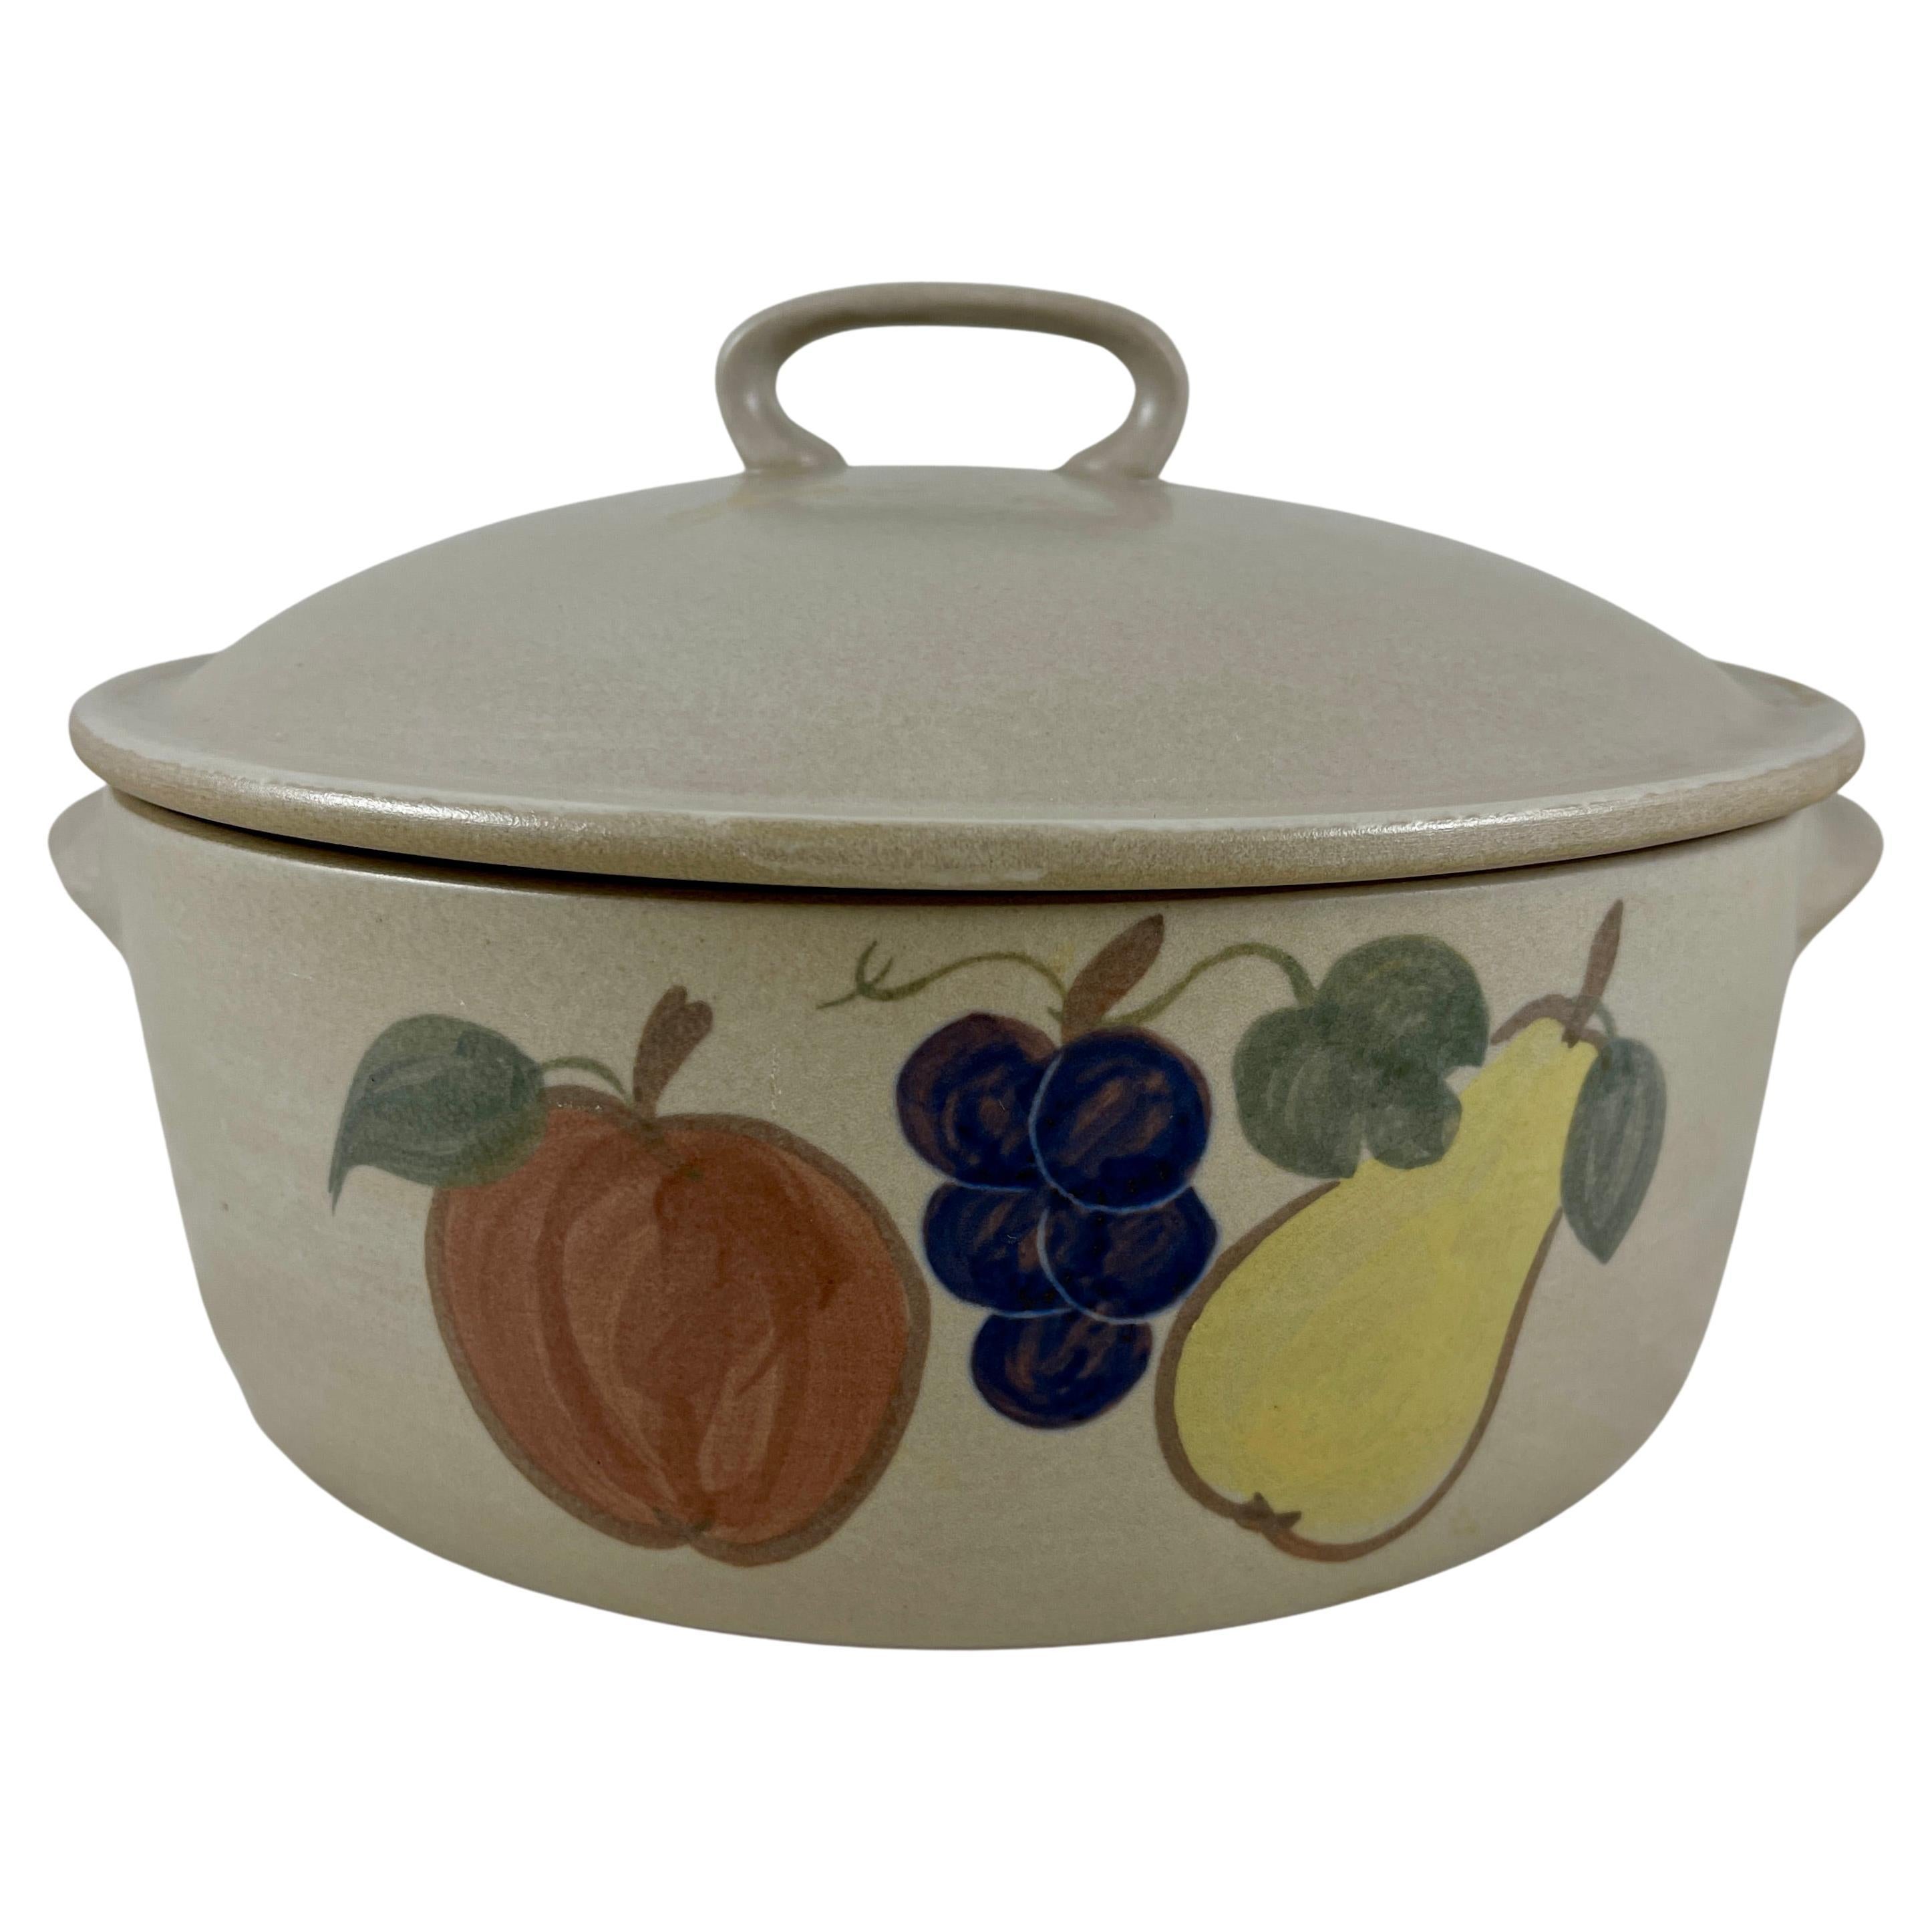 https://a.1stdibscdn.com/mid-century-goss-chatham-pottery-country-harvest-stoneware-dutch-oven-casserole-for-sale/f_17582/f_258681821635333632052/f_25868182_1635333633136_bg_processed.jpg